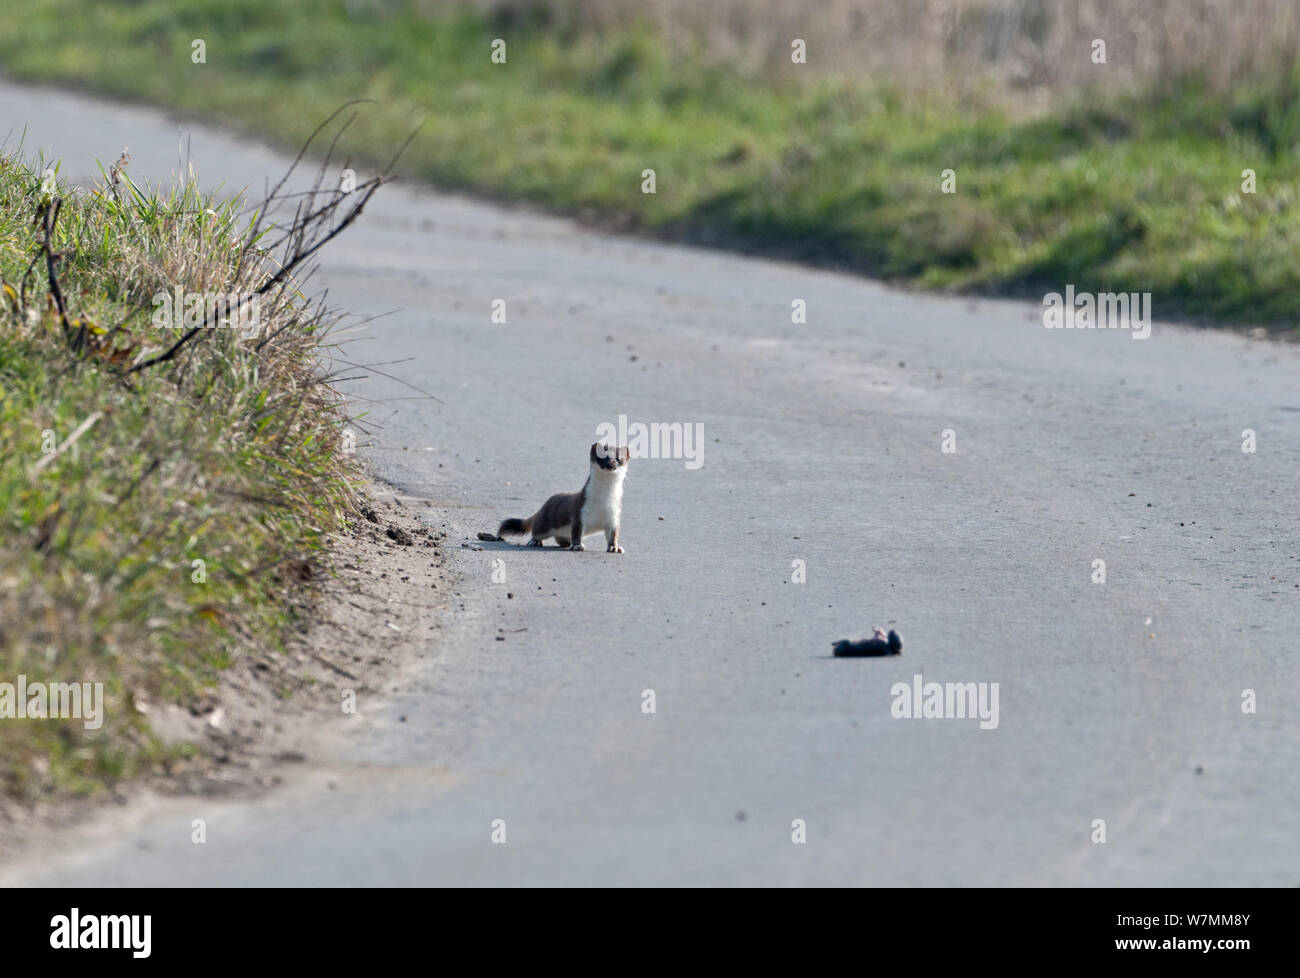 Stoat (Mustela erminea) approaching a young dead rat on road, The Fens, Cambridgeshire, UK, Stock Photo